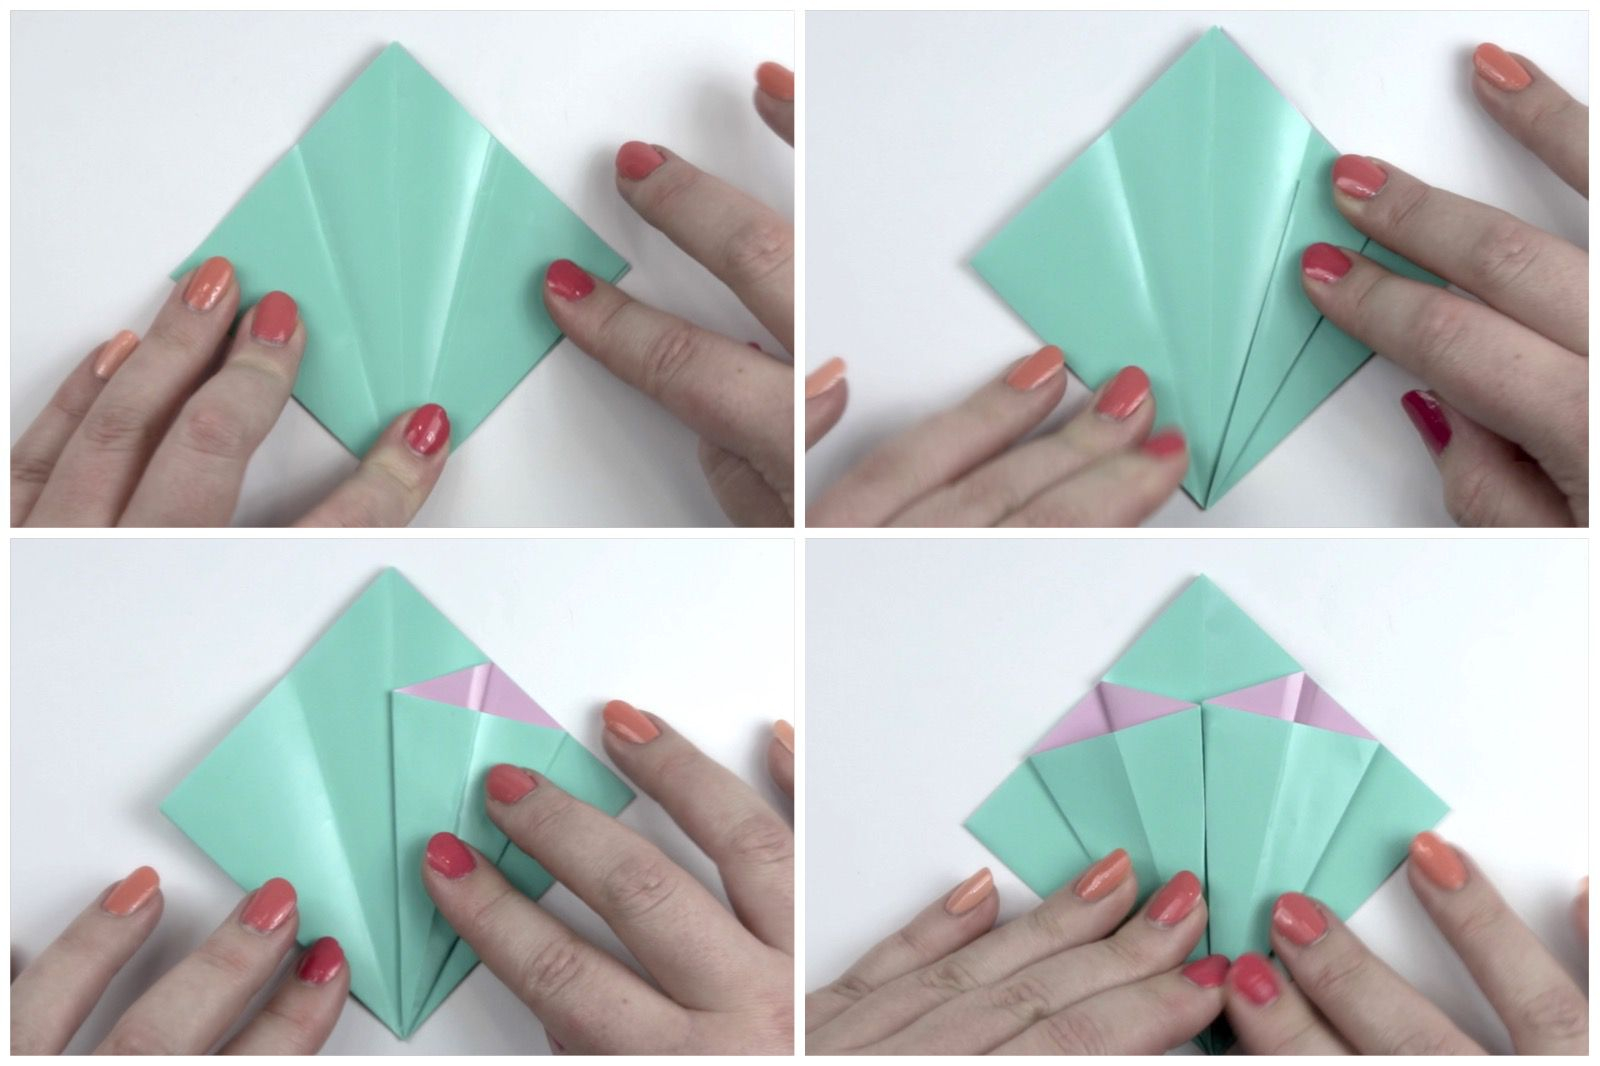 How To Make Flowers With Origami Make An Easy Origami Lily Flower